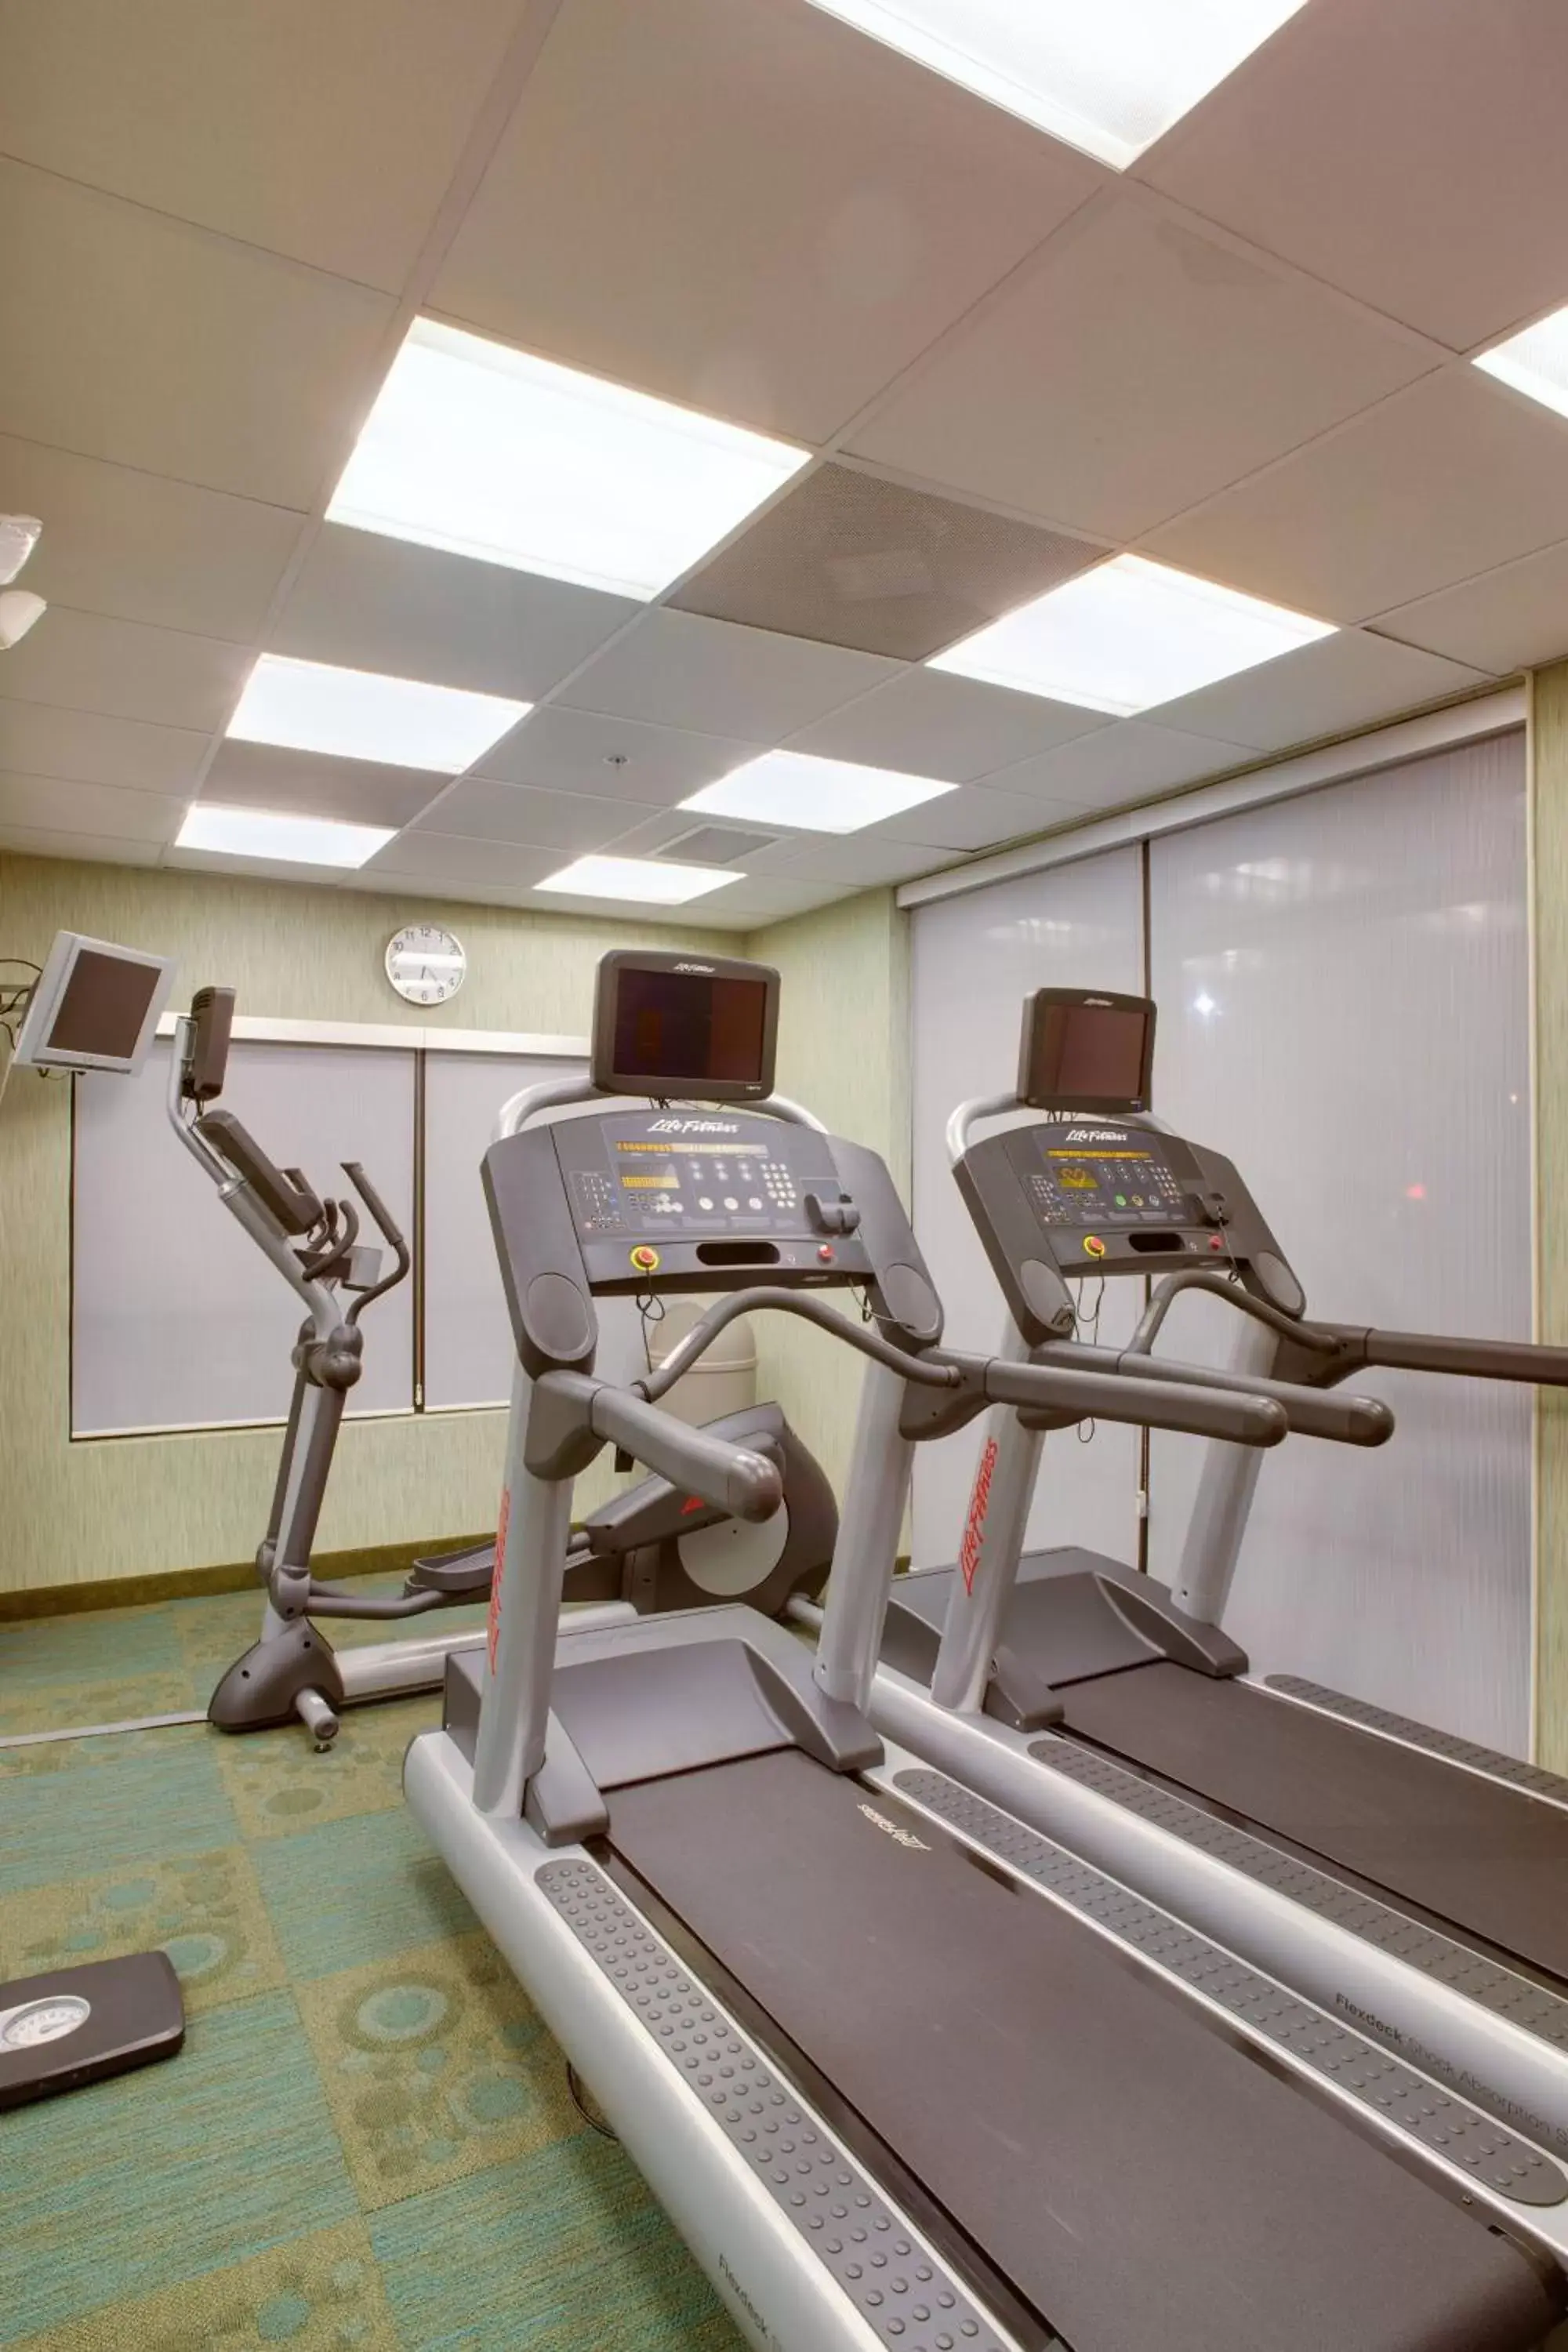 Fitness centre/facilities, Fitness Center/Facilities in SpringHill Suites by Marriott Savannah I-95 South